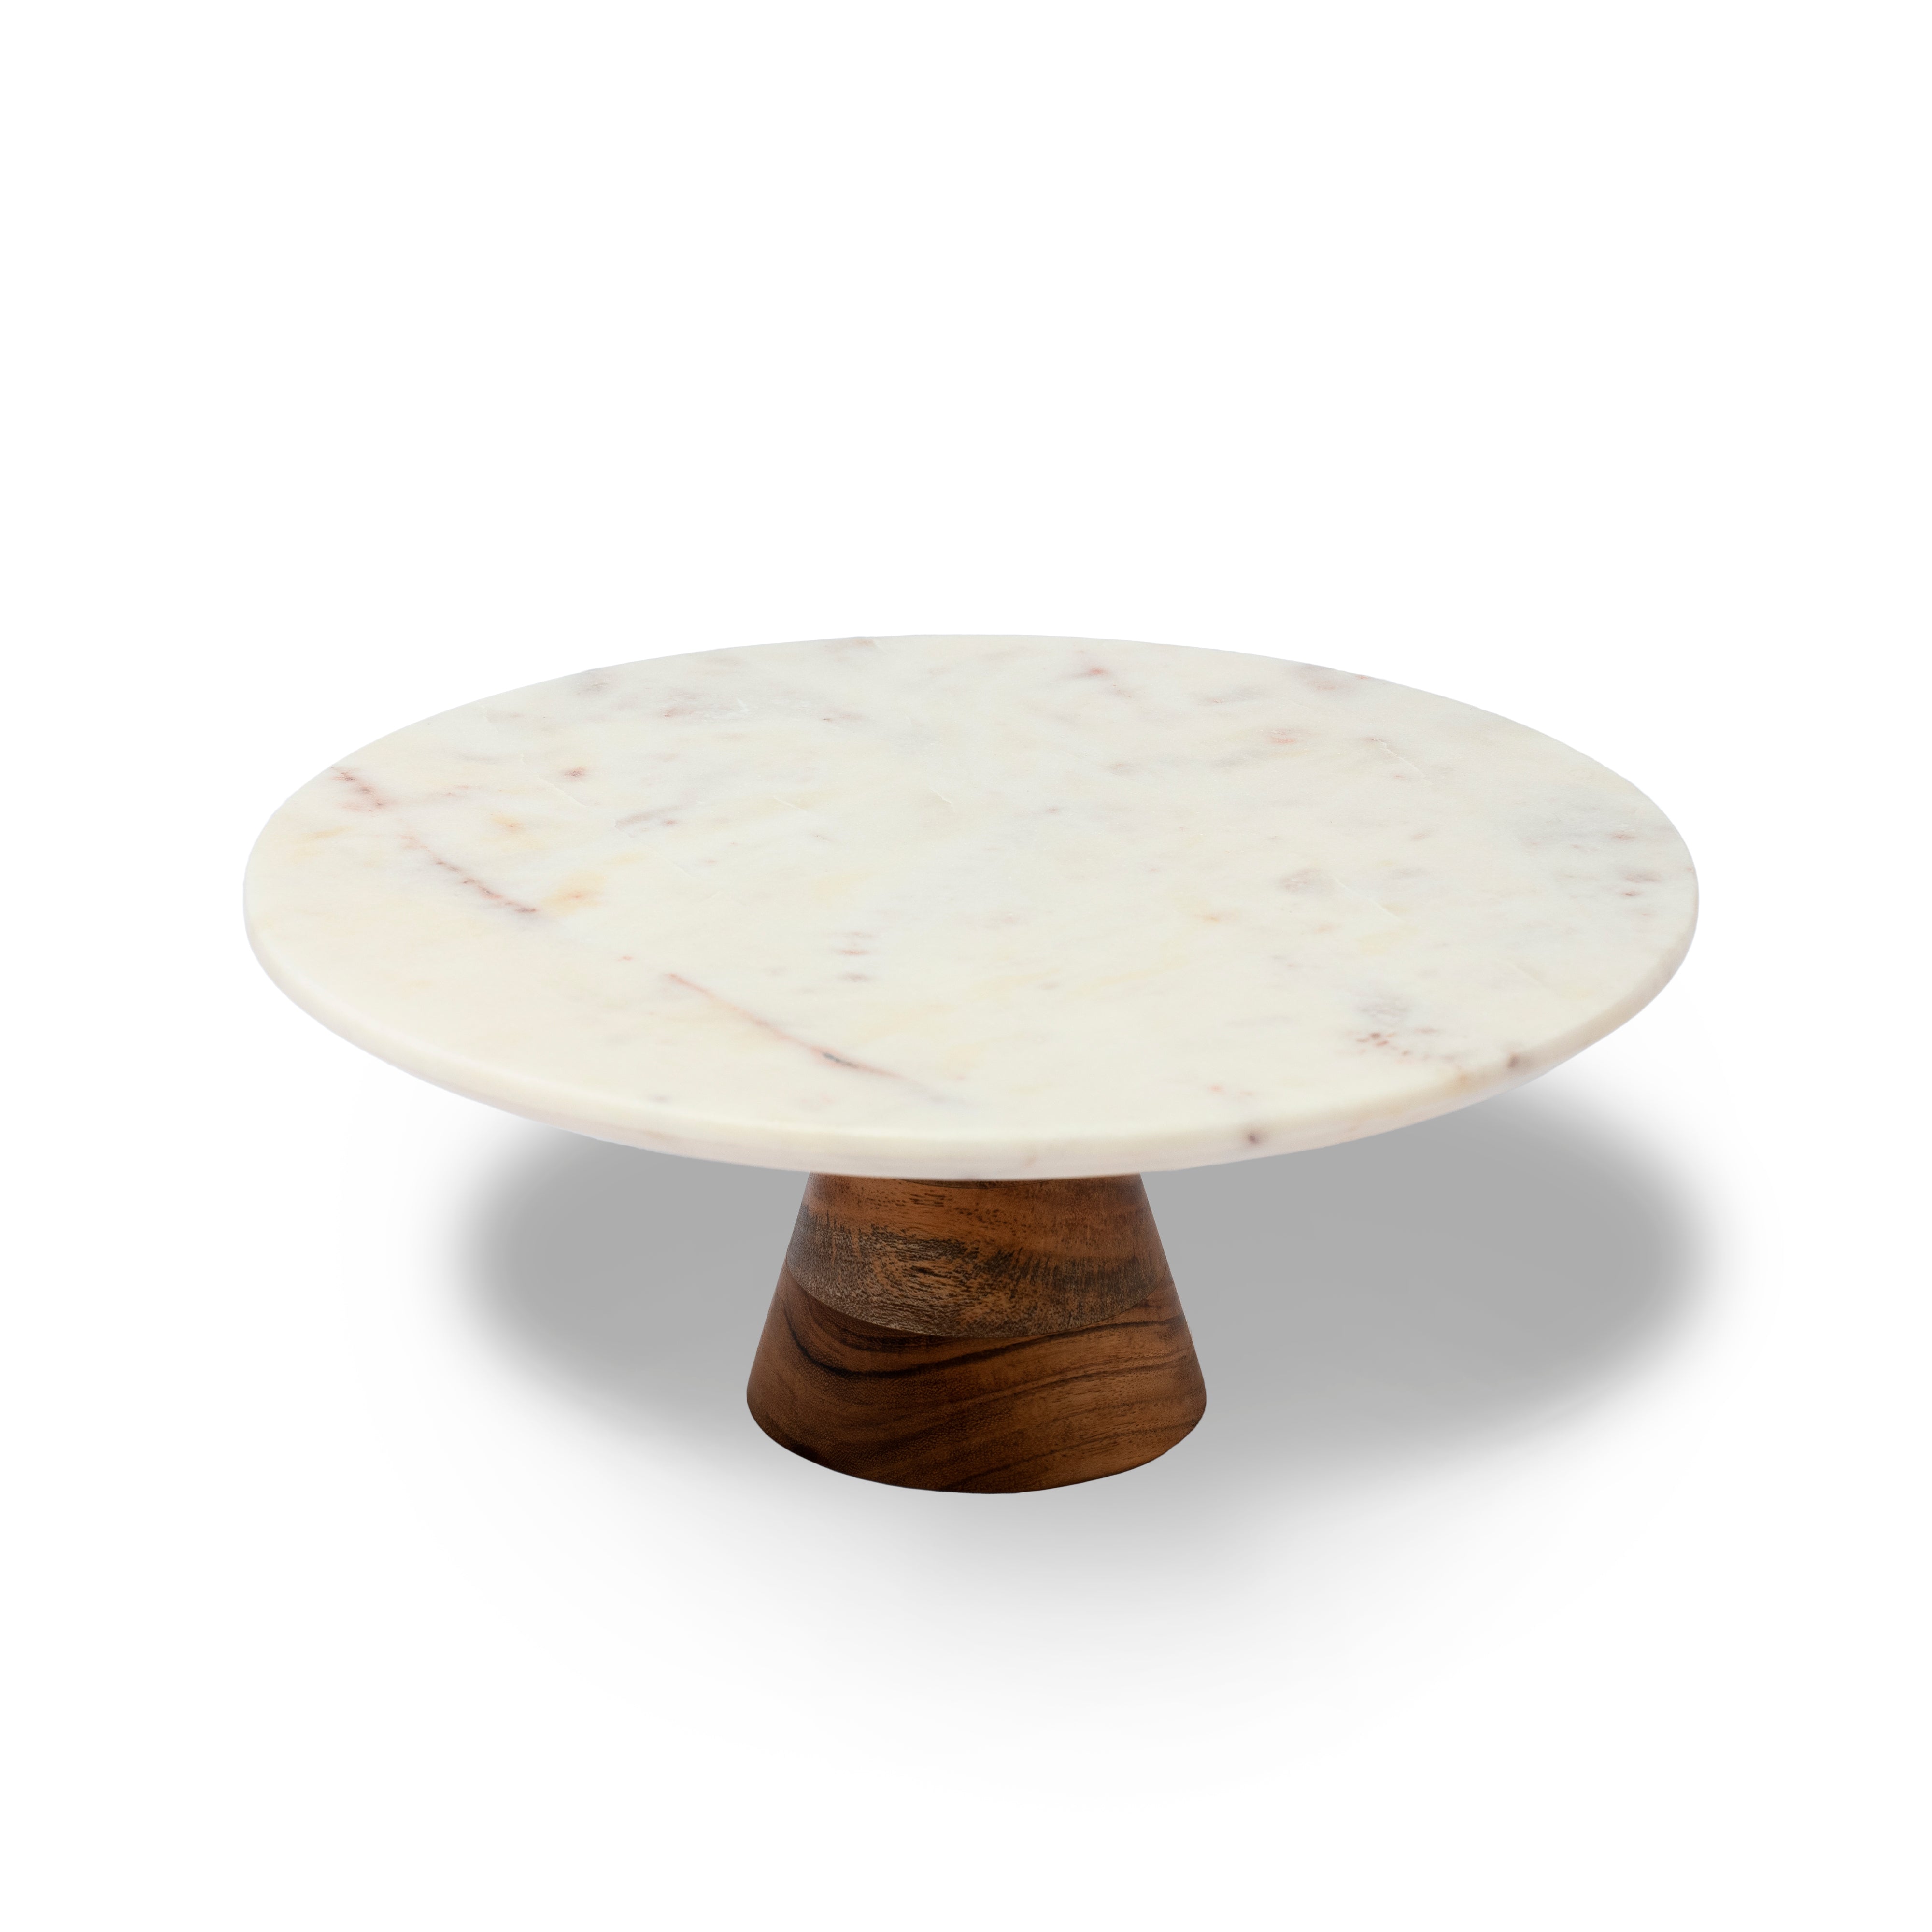 Buy Marble And Wooden 2 Tier Cake Stand For Home Or Party Online - Ikiru